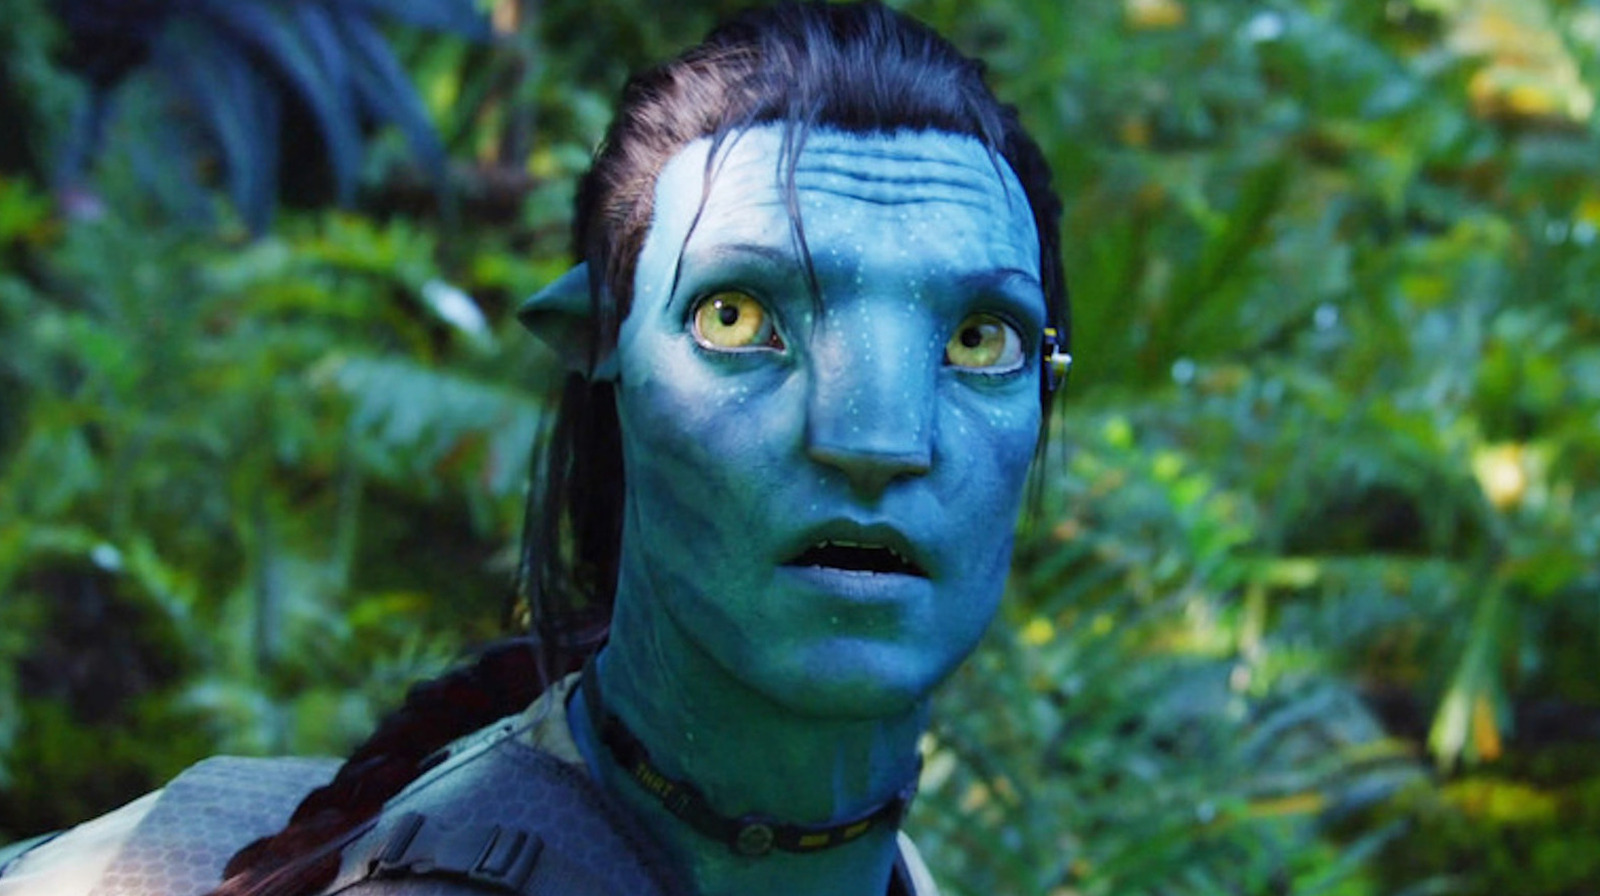 #The Dietary Restriction Every Avatar Actor Had To Follow On Set